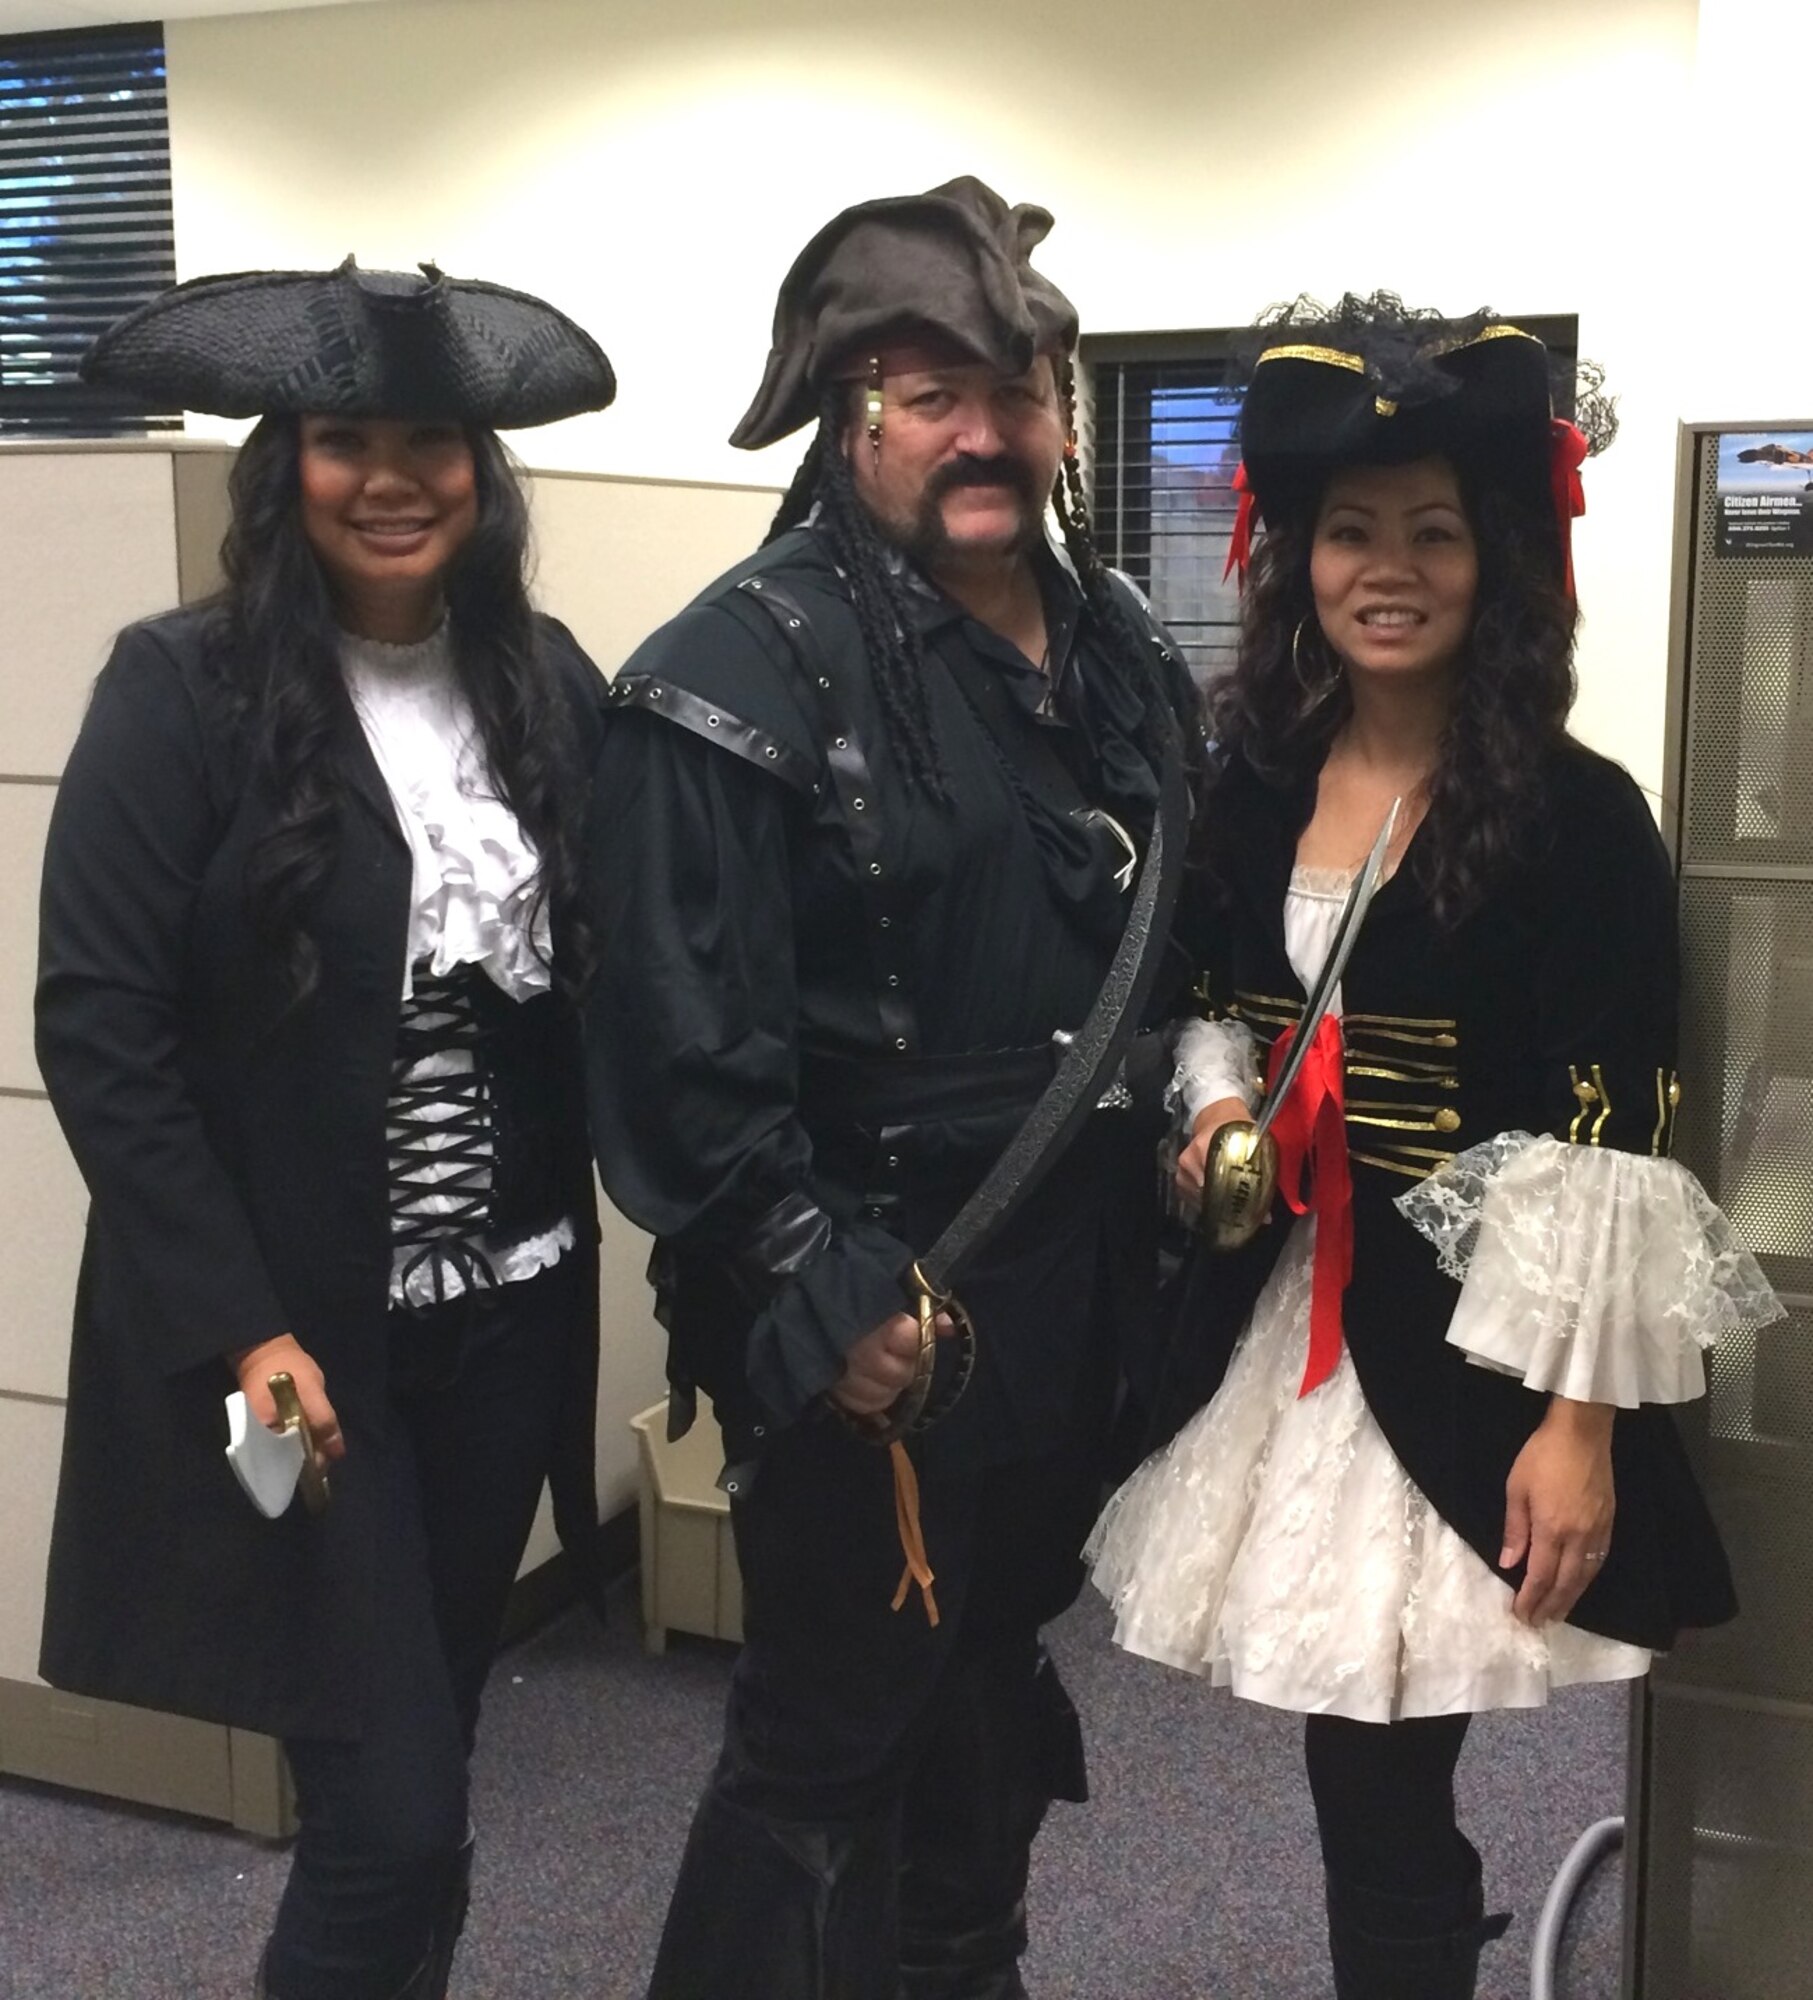 The 349th Air Mobility Wing (and especially our FM pirates) reminds everyone to have a safe, fun Halloween!